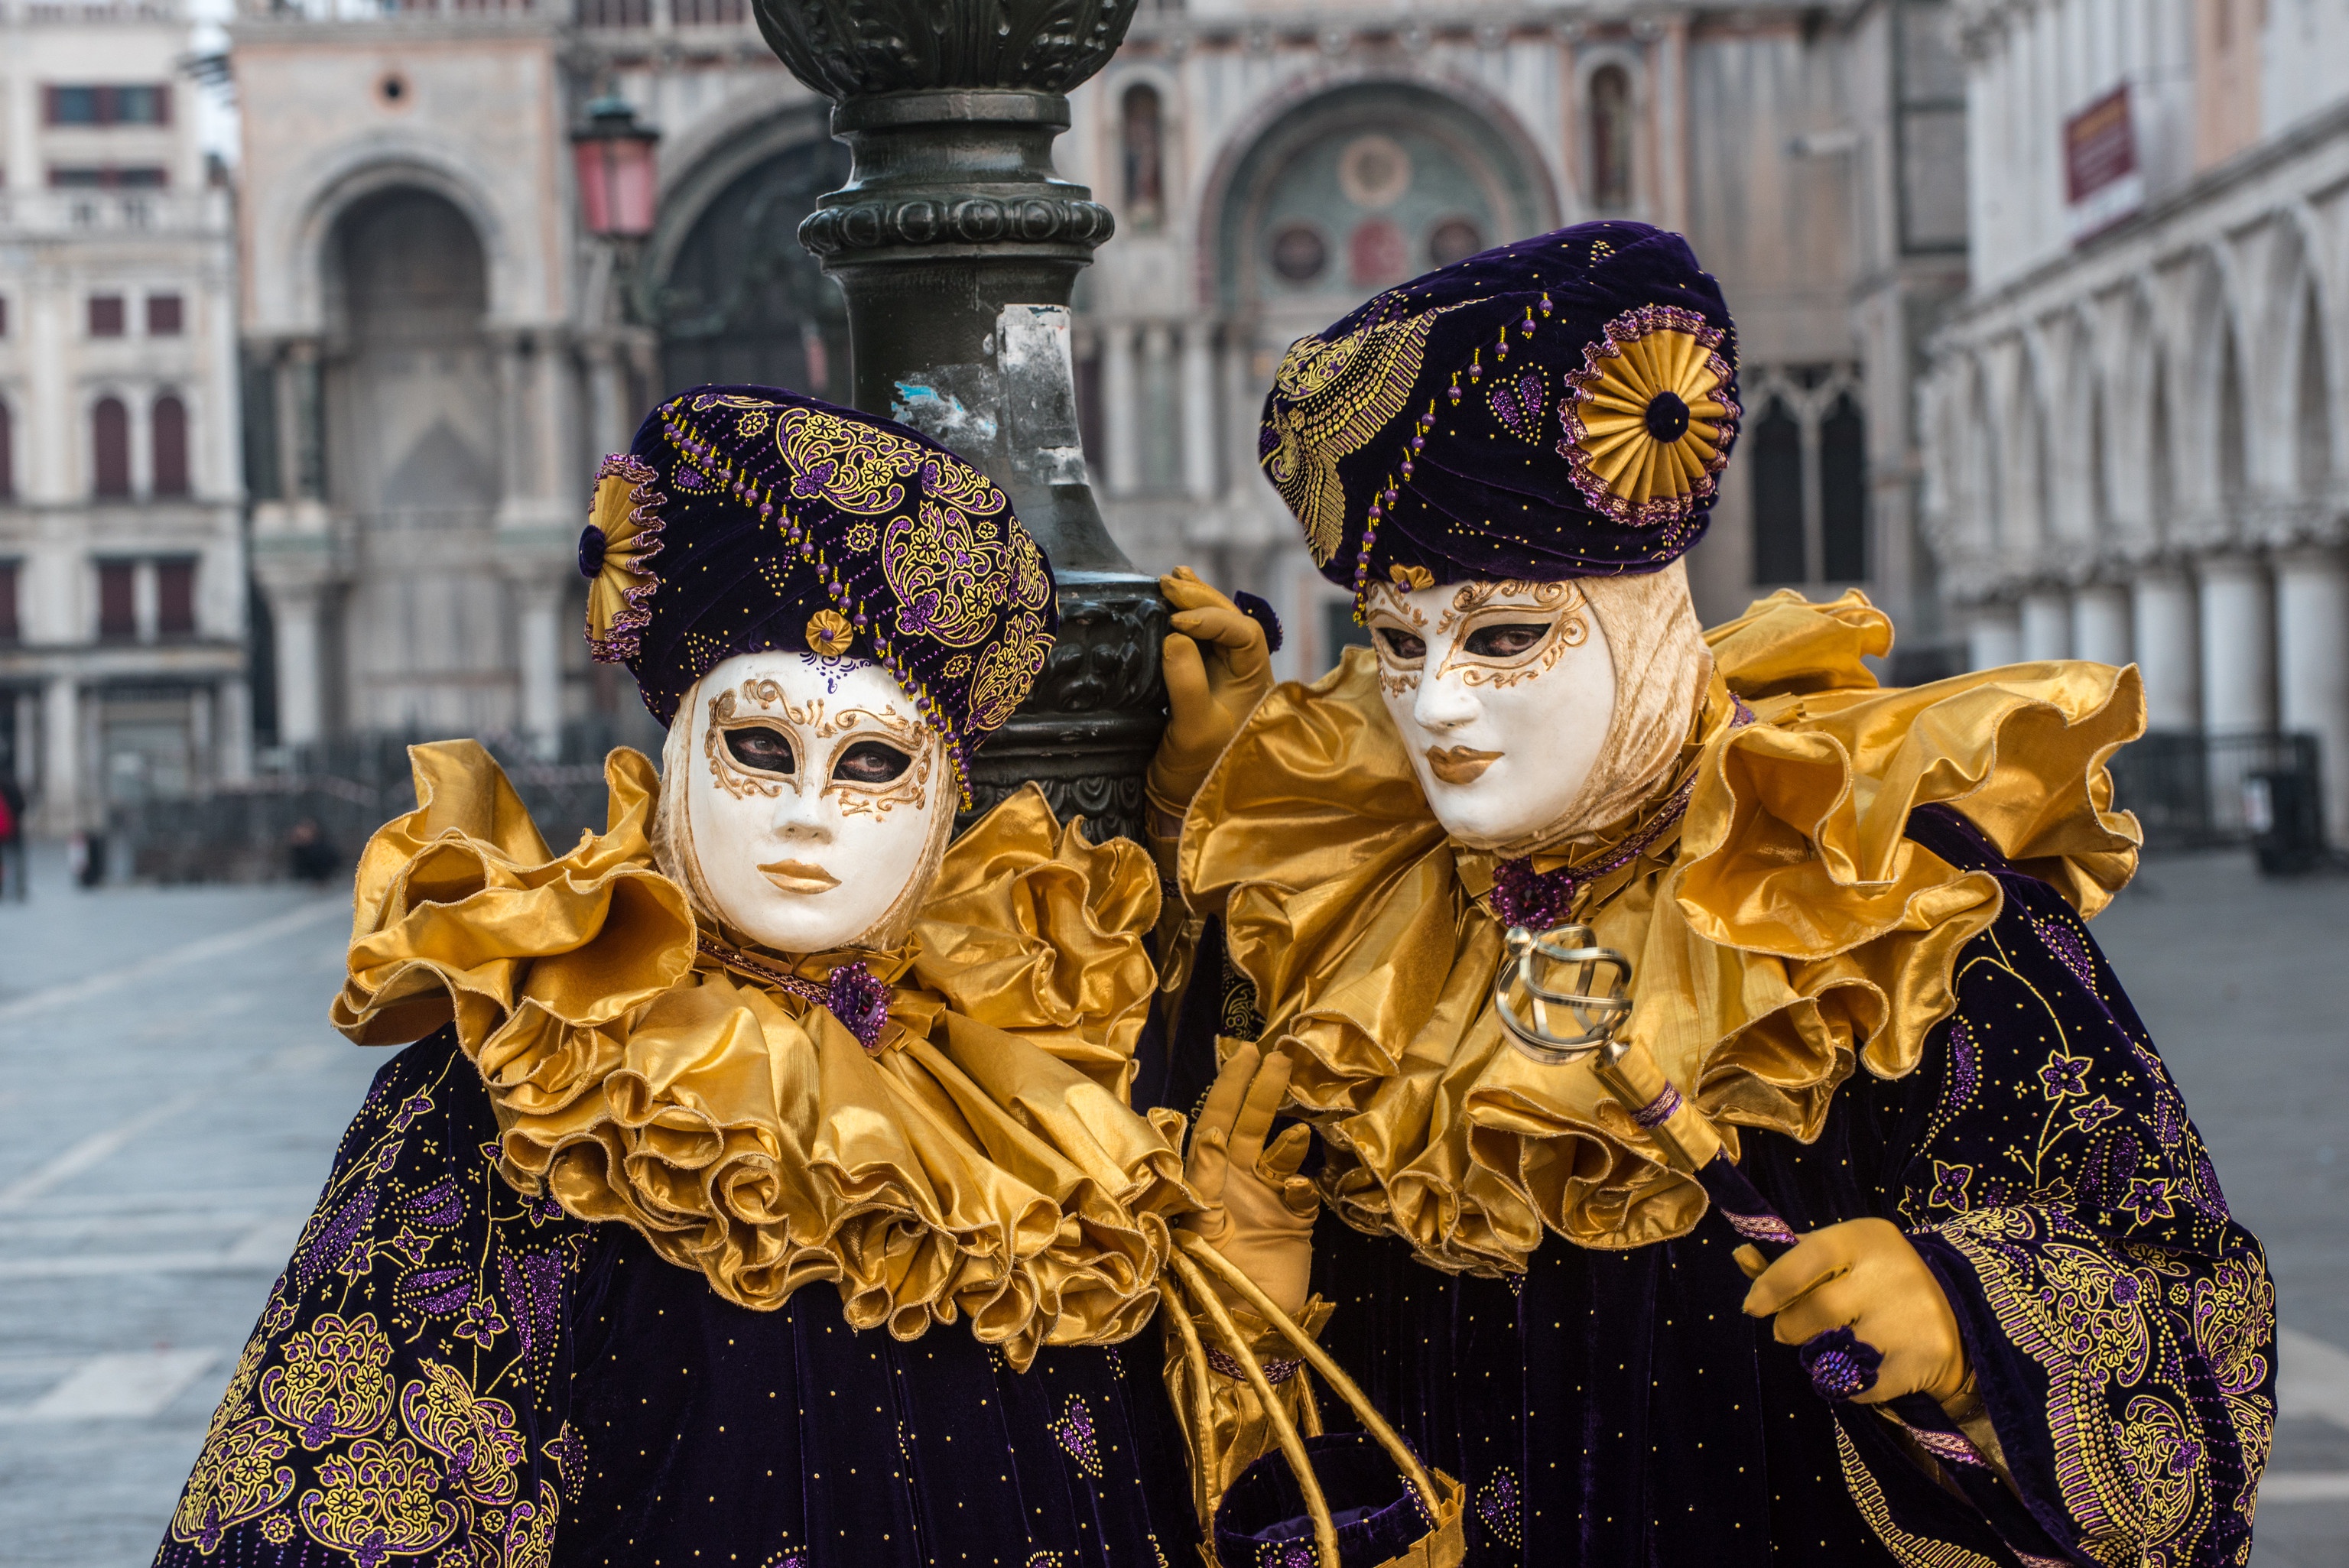 carnival, photography, carnival of venice, costume, italy, venice images